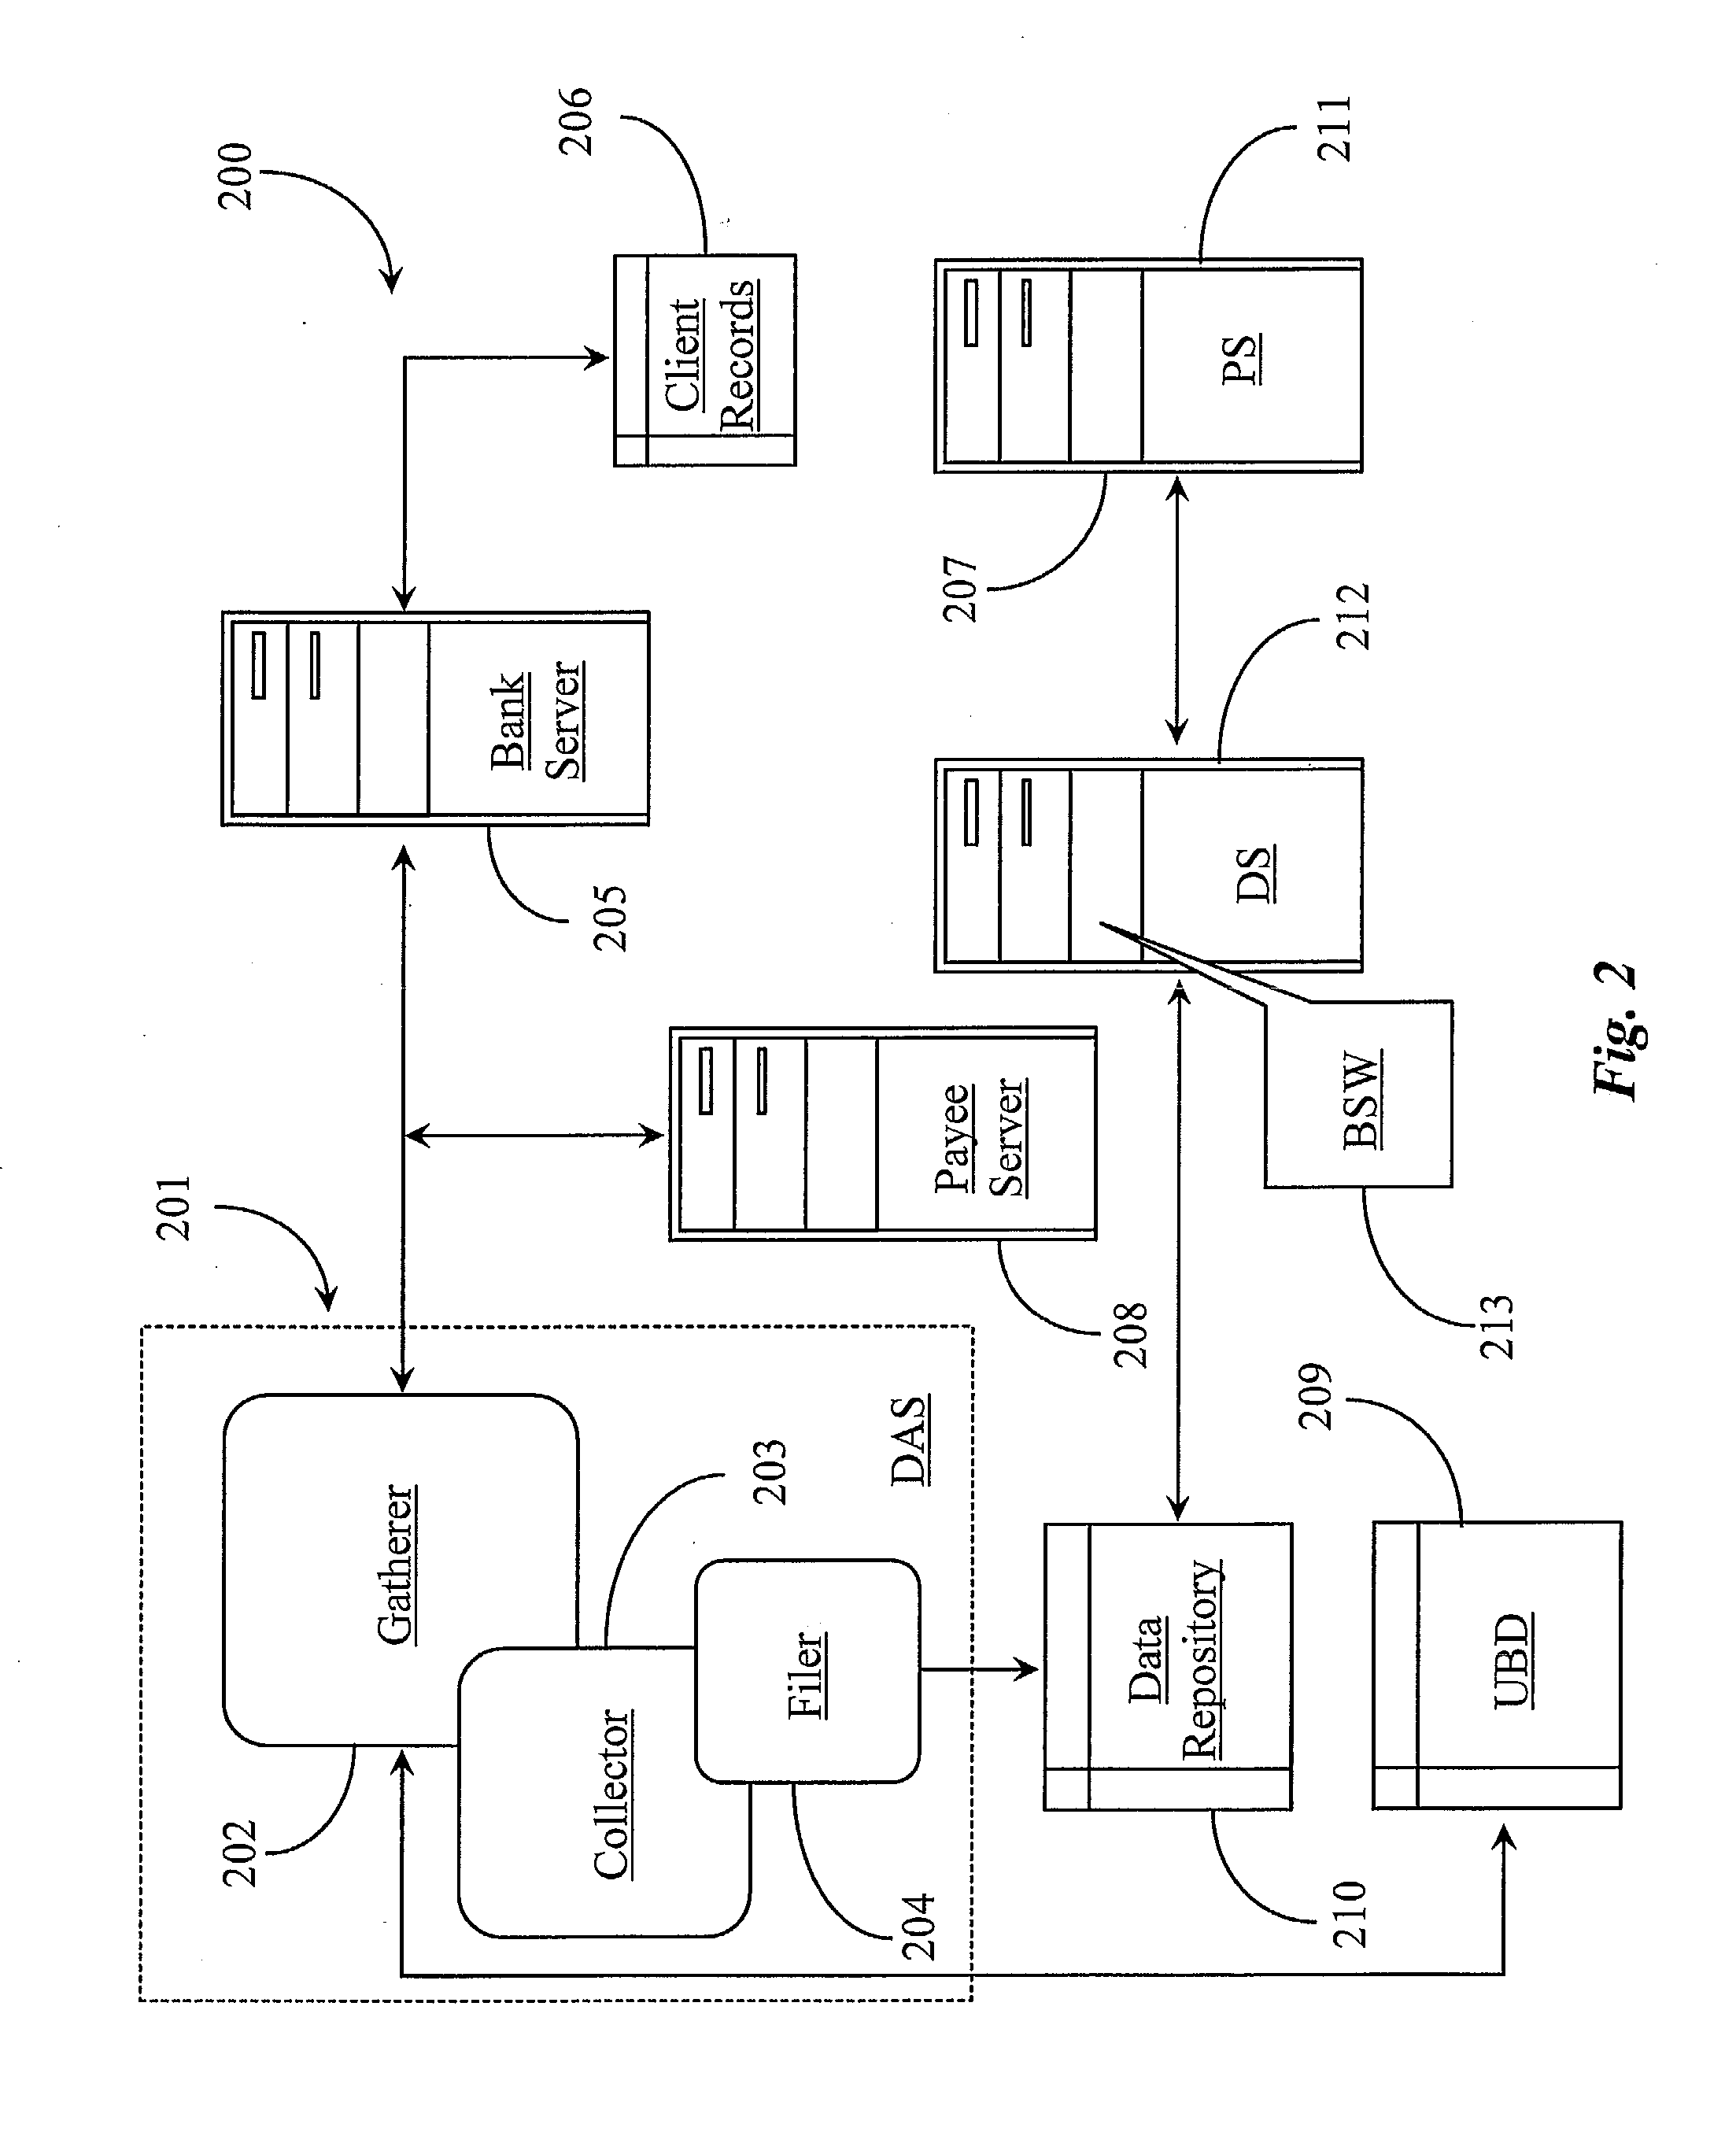 Method and System for Increasing Client Participation in a Network-Based Bill Pay Service